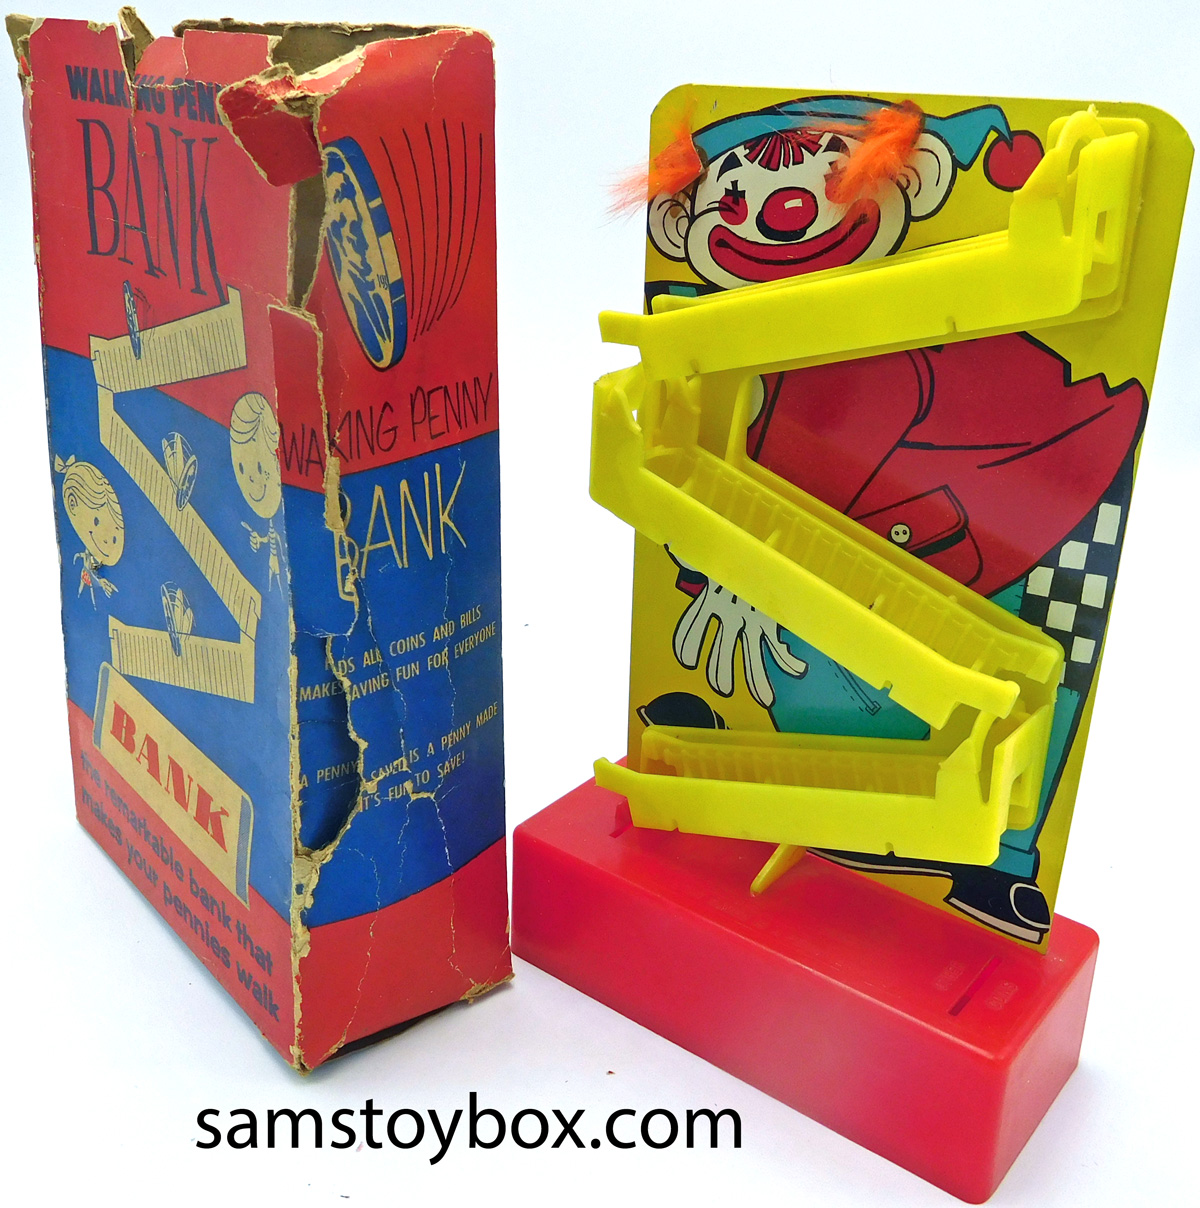 Clown w/red base and yellow ramps Walking Penny Bank by Tigrett Industries